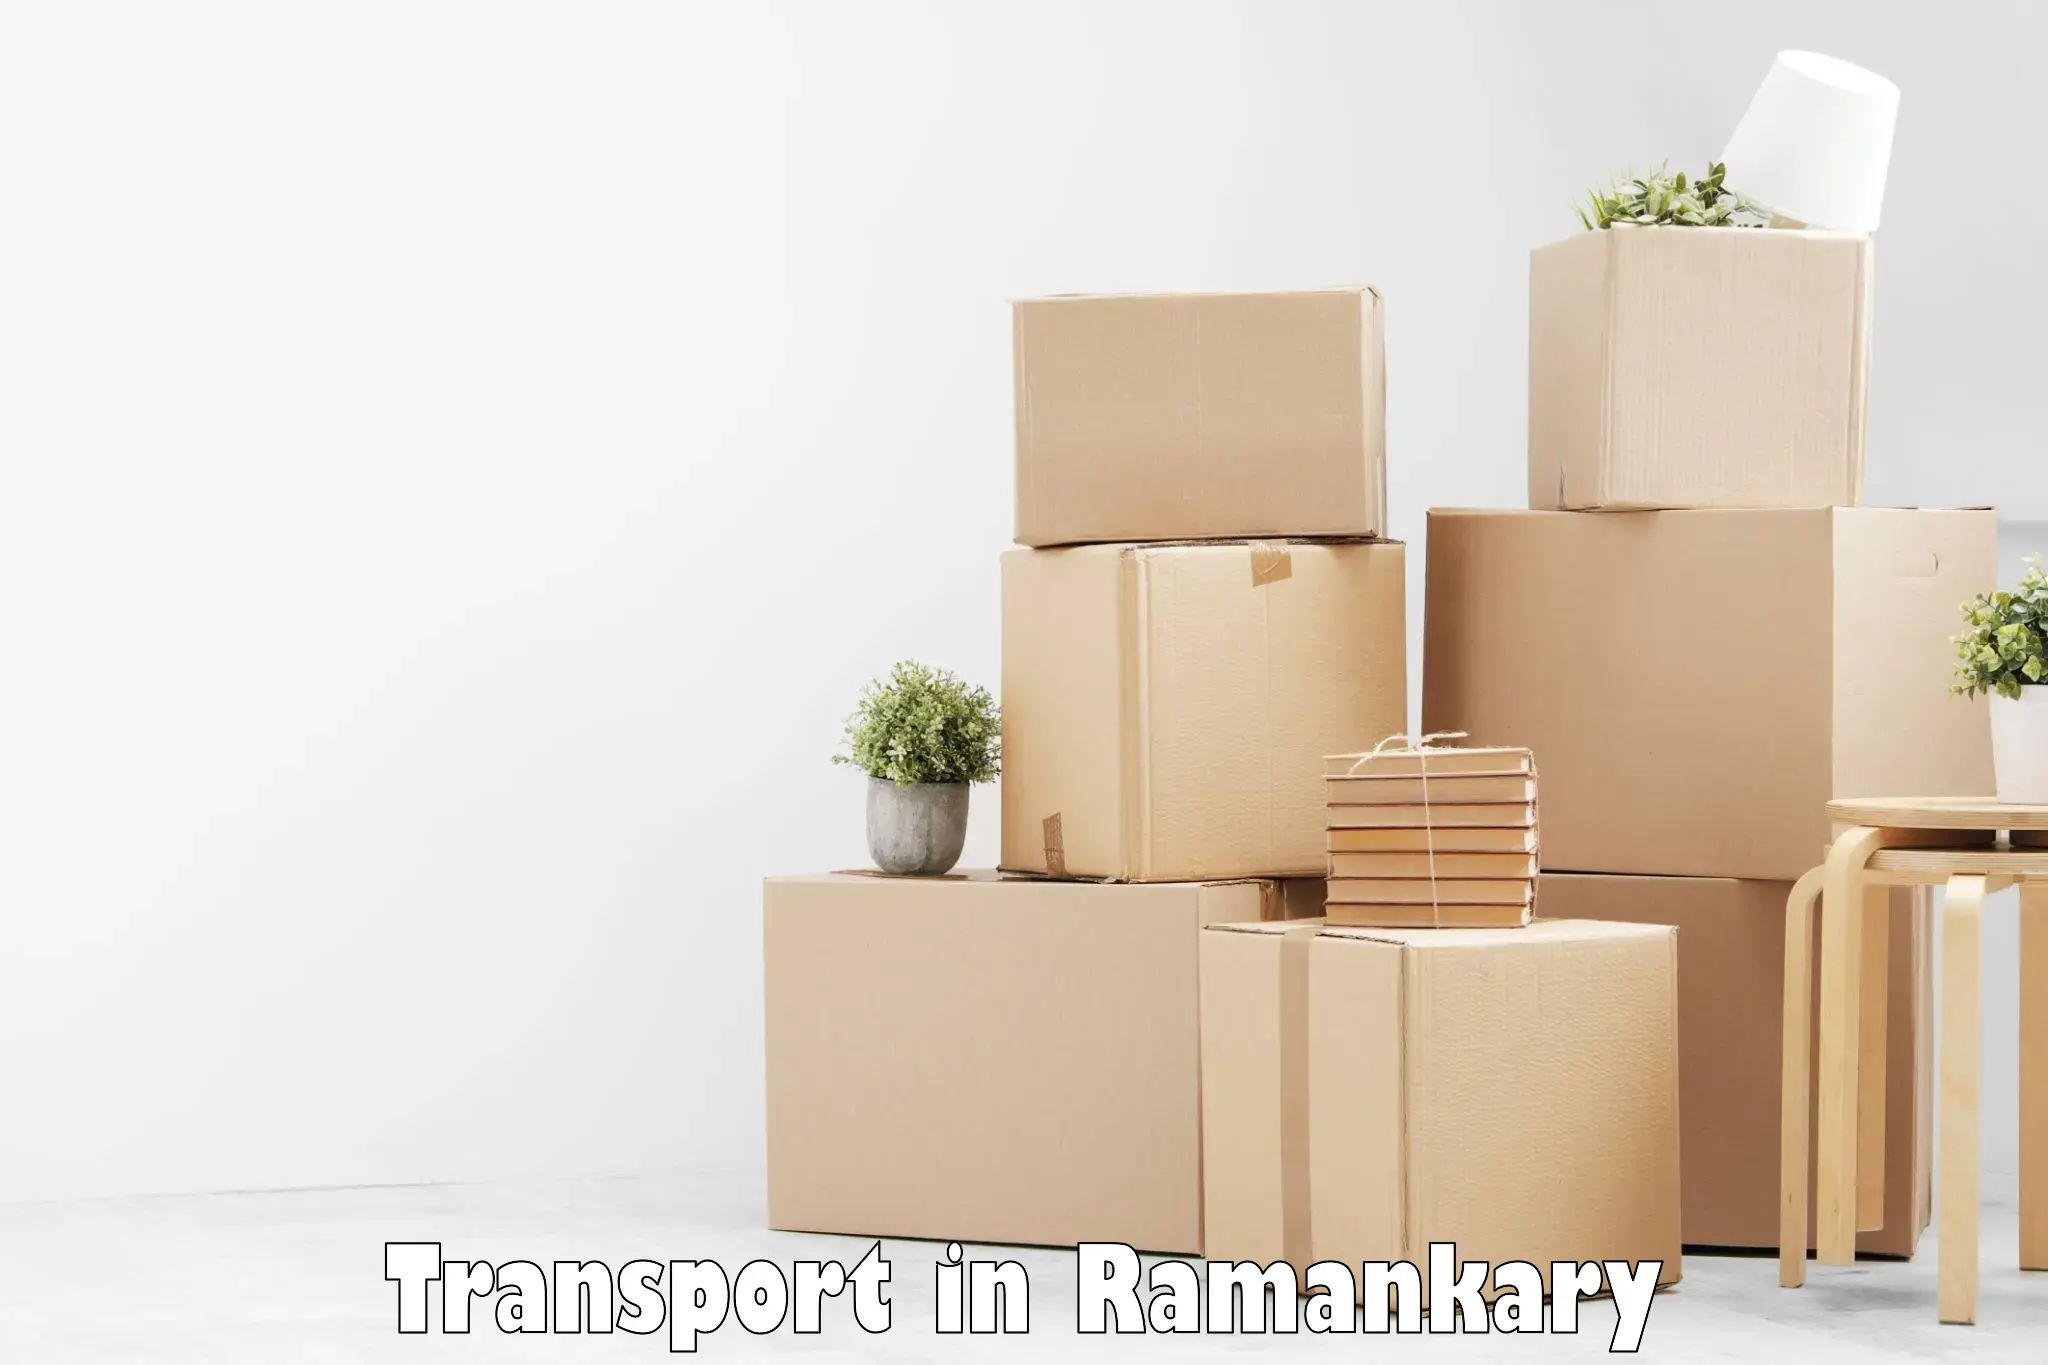 Land transport services in Ramankary